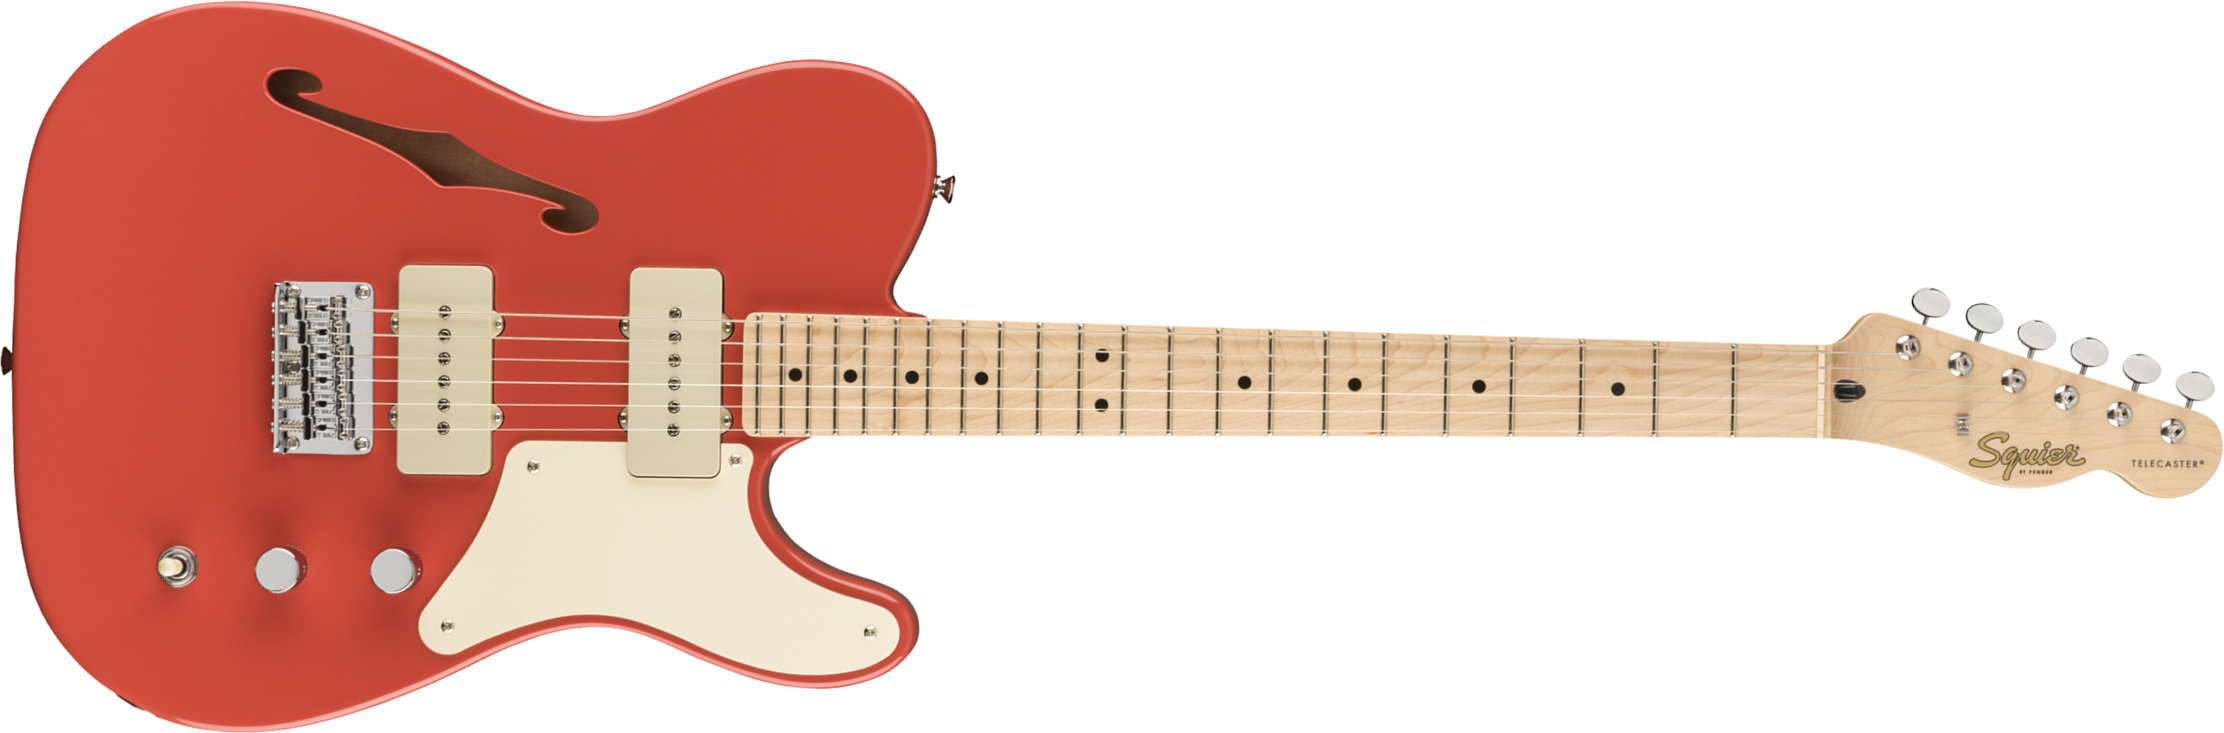 Squier Tele Thinline Cabronita Paranormal Ss Ht Mn - Fiesta Red - Guitare Électrique 1/2 Caisse - Main picture